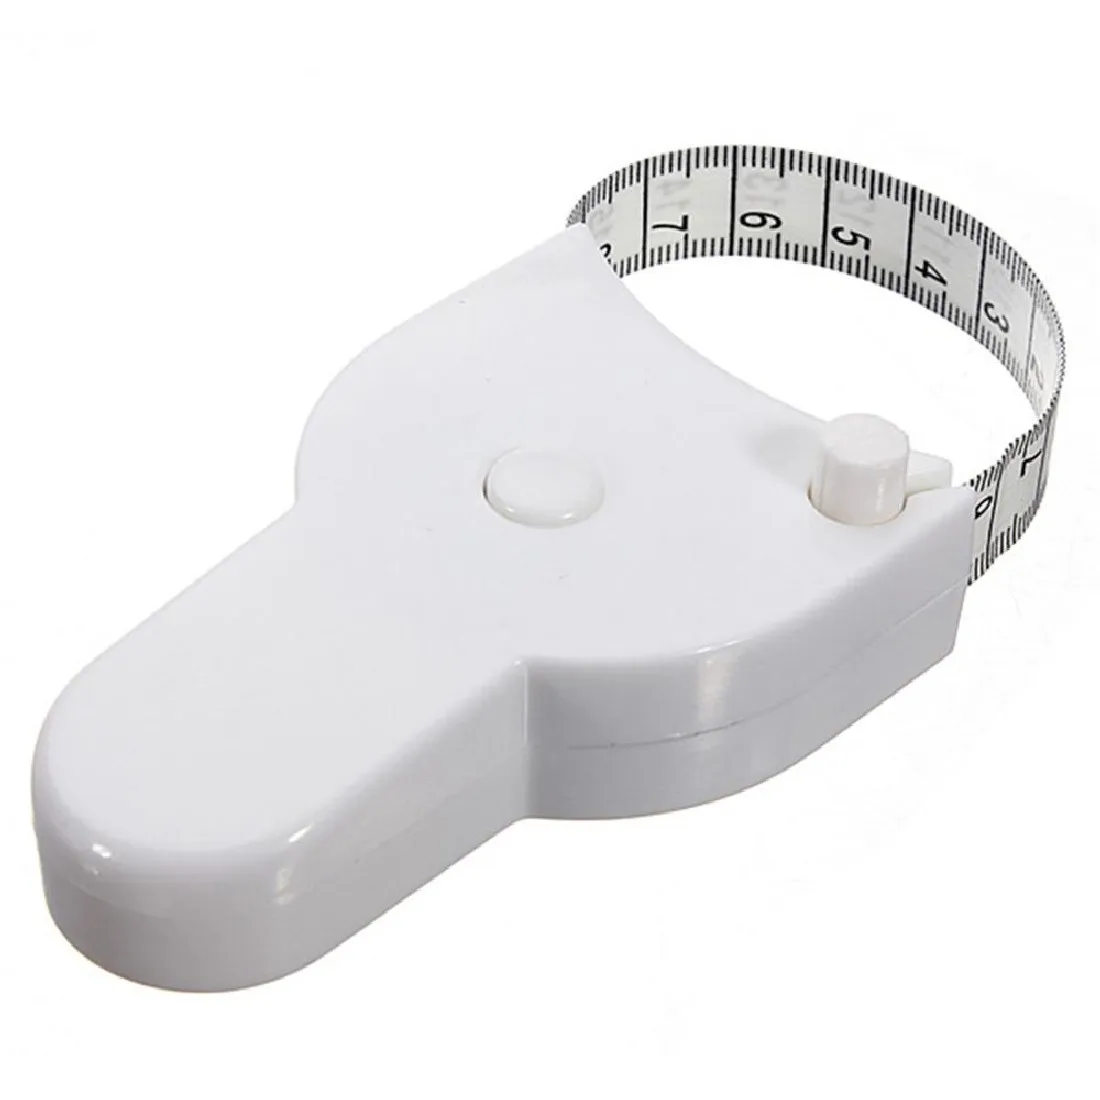 New Style 1pcs 150cm Fitness Accurate Caliper Measuring Tape Body Fat font b Weight b font